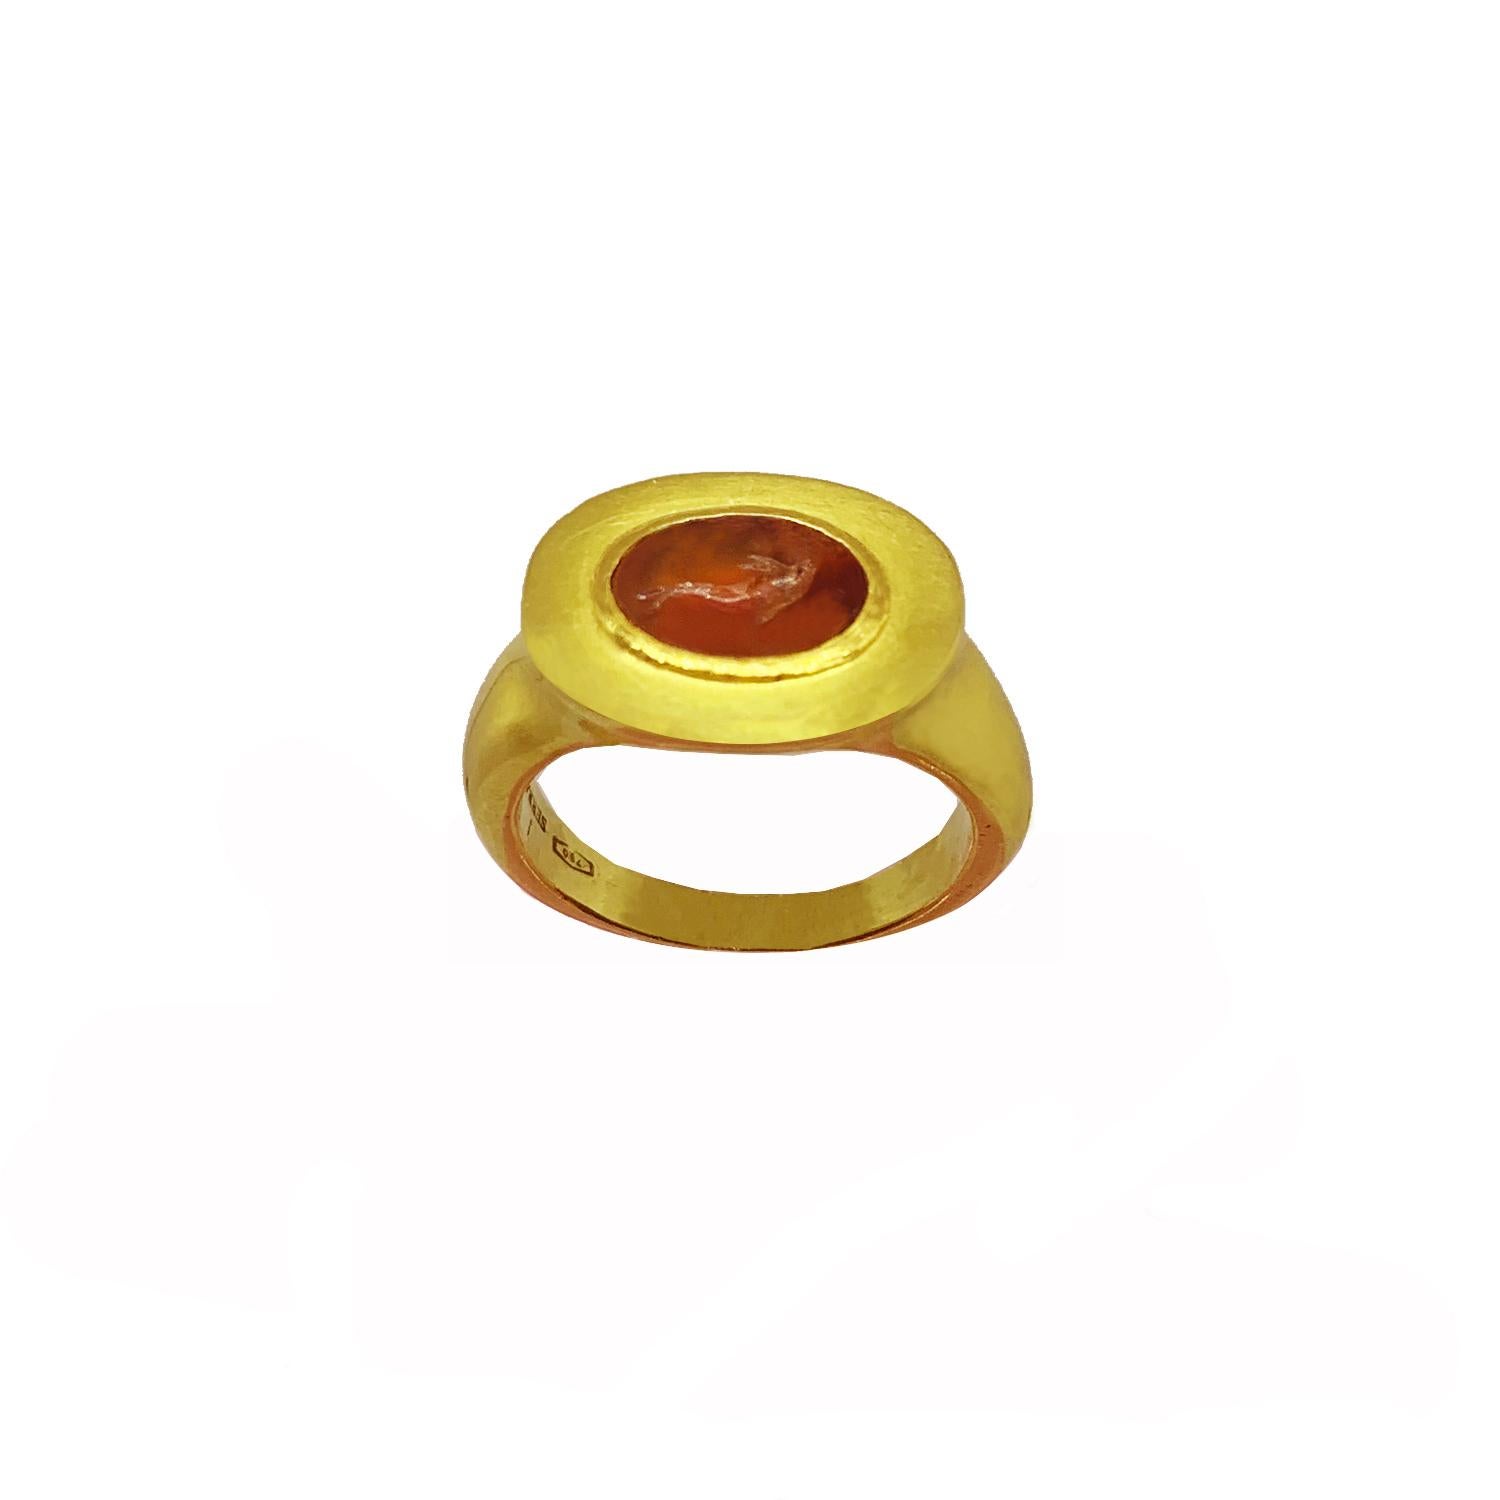 The ring has an authentic Roman intaglio (1-2th century BC) on carnelian. In Roman times the dolphin was dedicated to Apollo: mammalian animal and friend of man, sensitive to music, companion of sailors, dear to the Gods ( his capture was a 